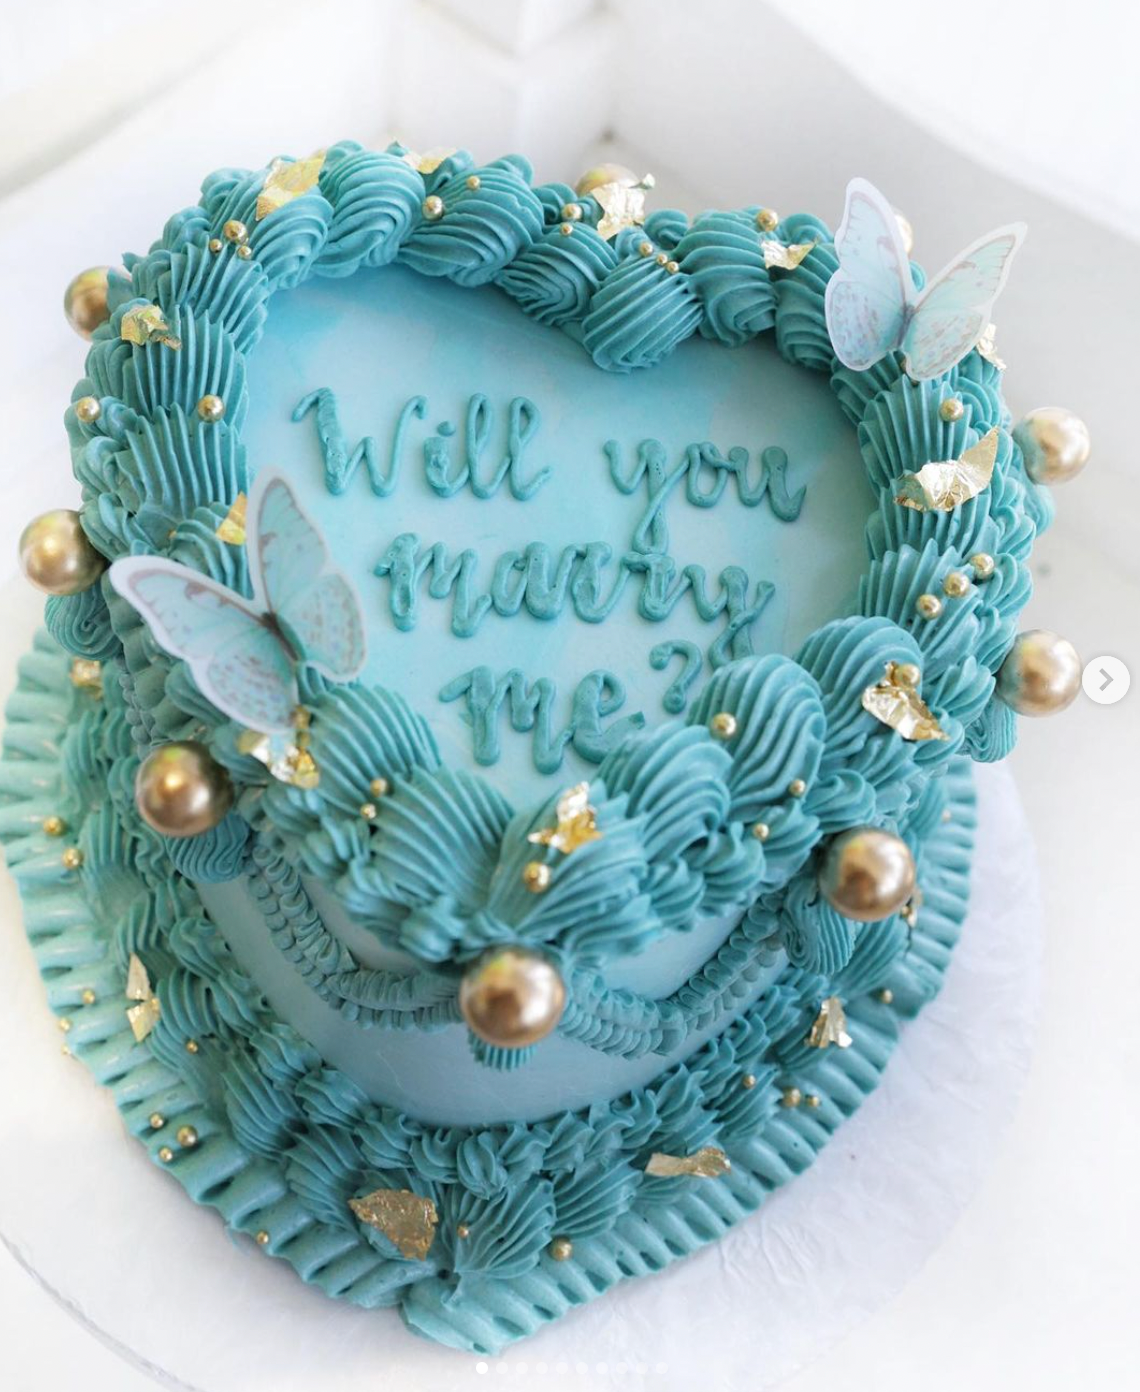 Crazy About You! Vintage Heart Cake